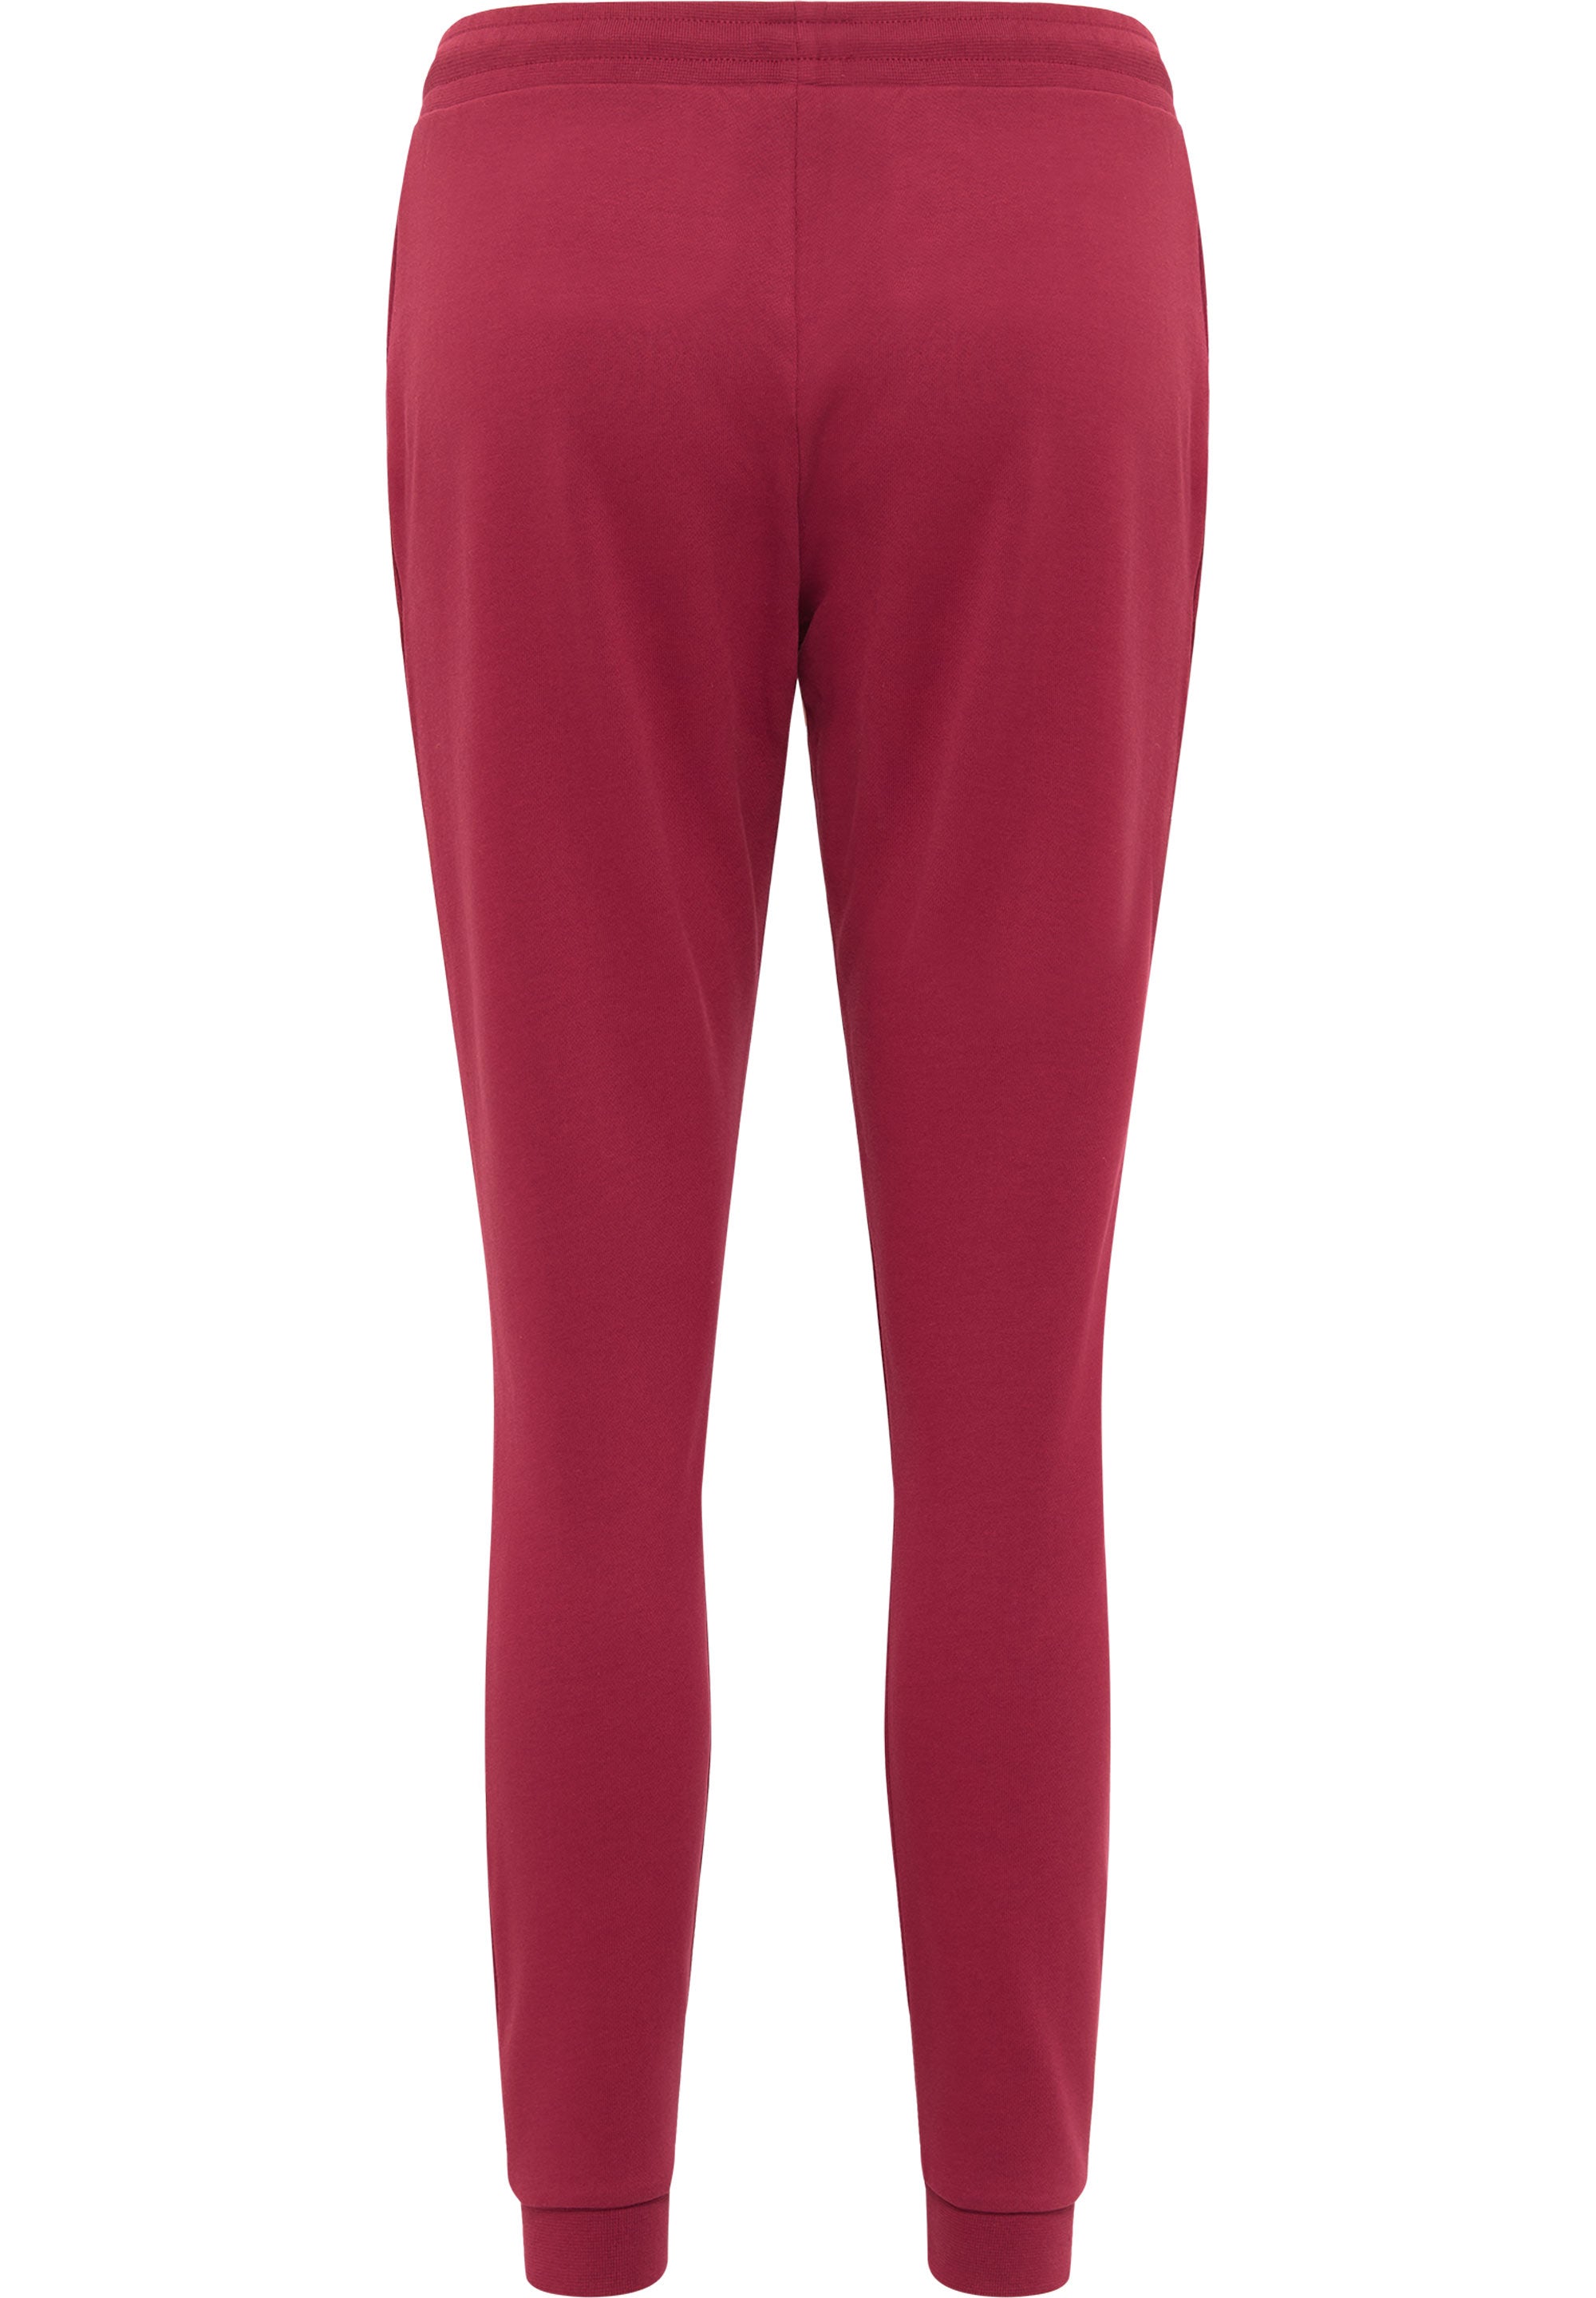 SOMWR COMMENCE Pants RED001